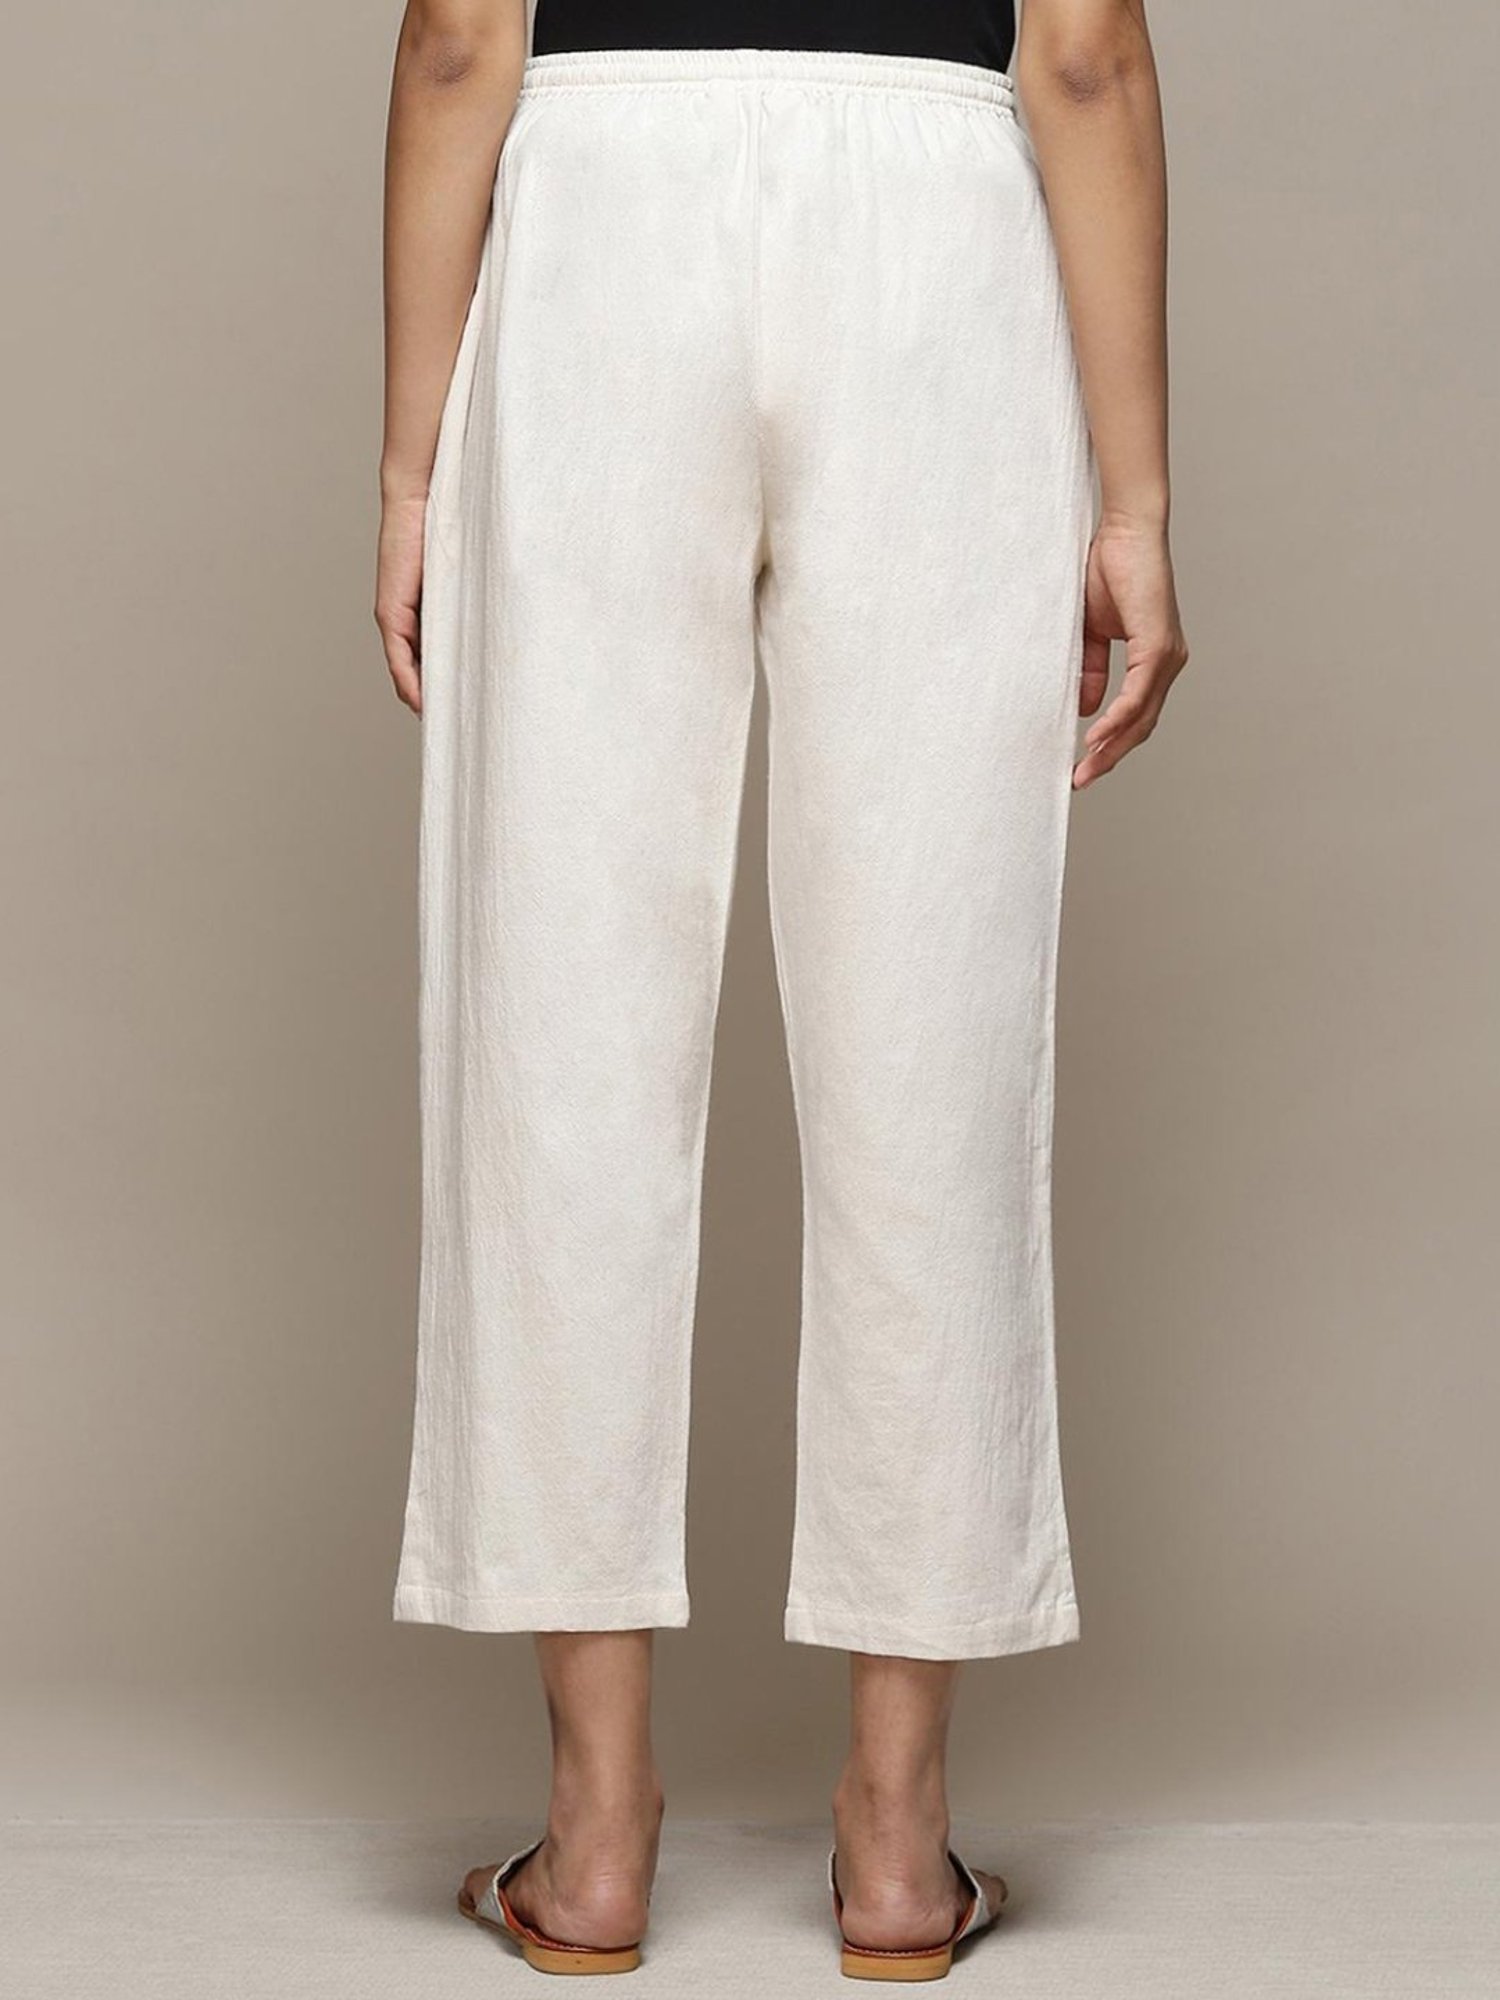 Buy Biba Off White Cotton Embroidered Narrow Pant online